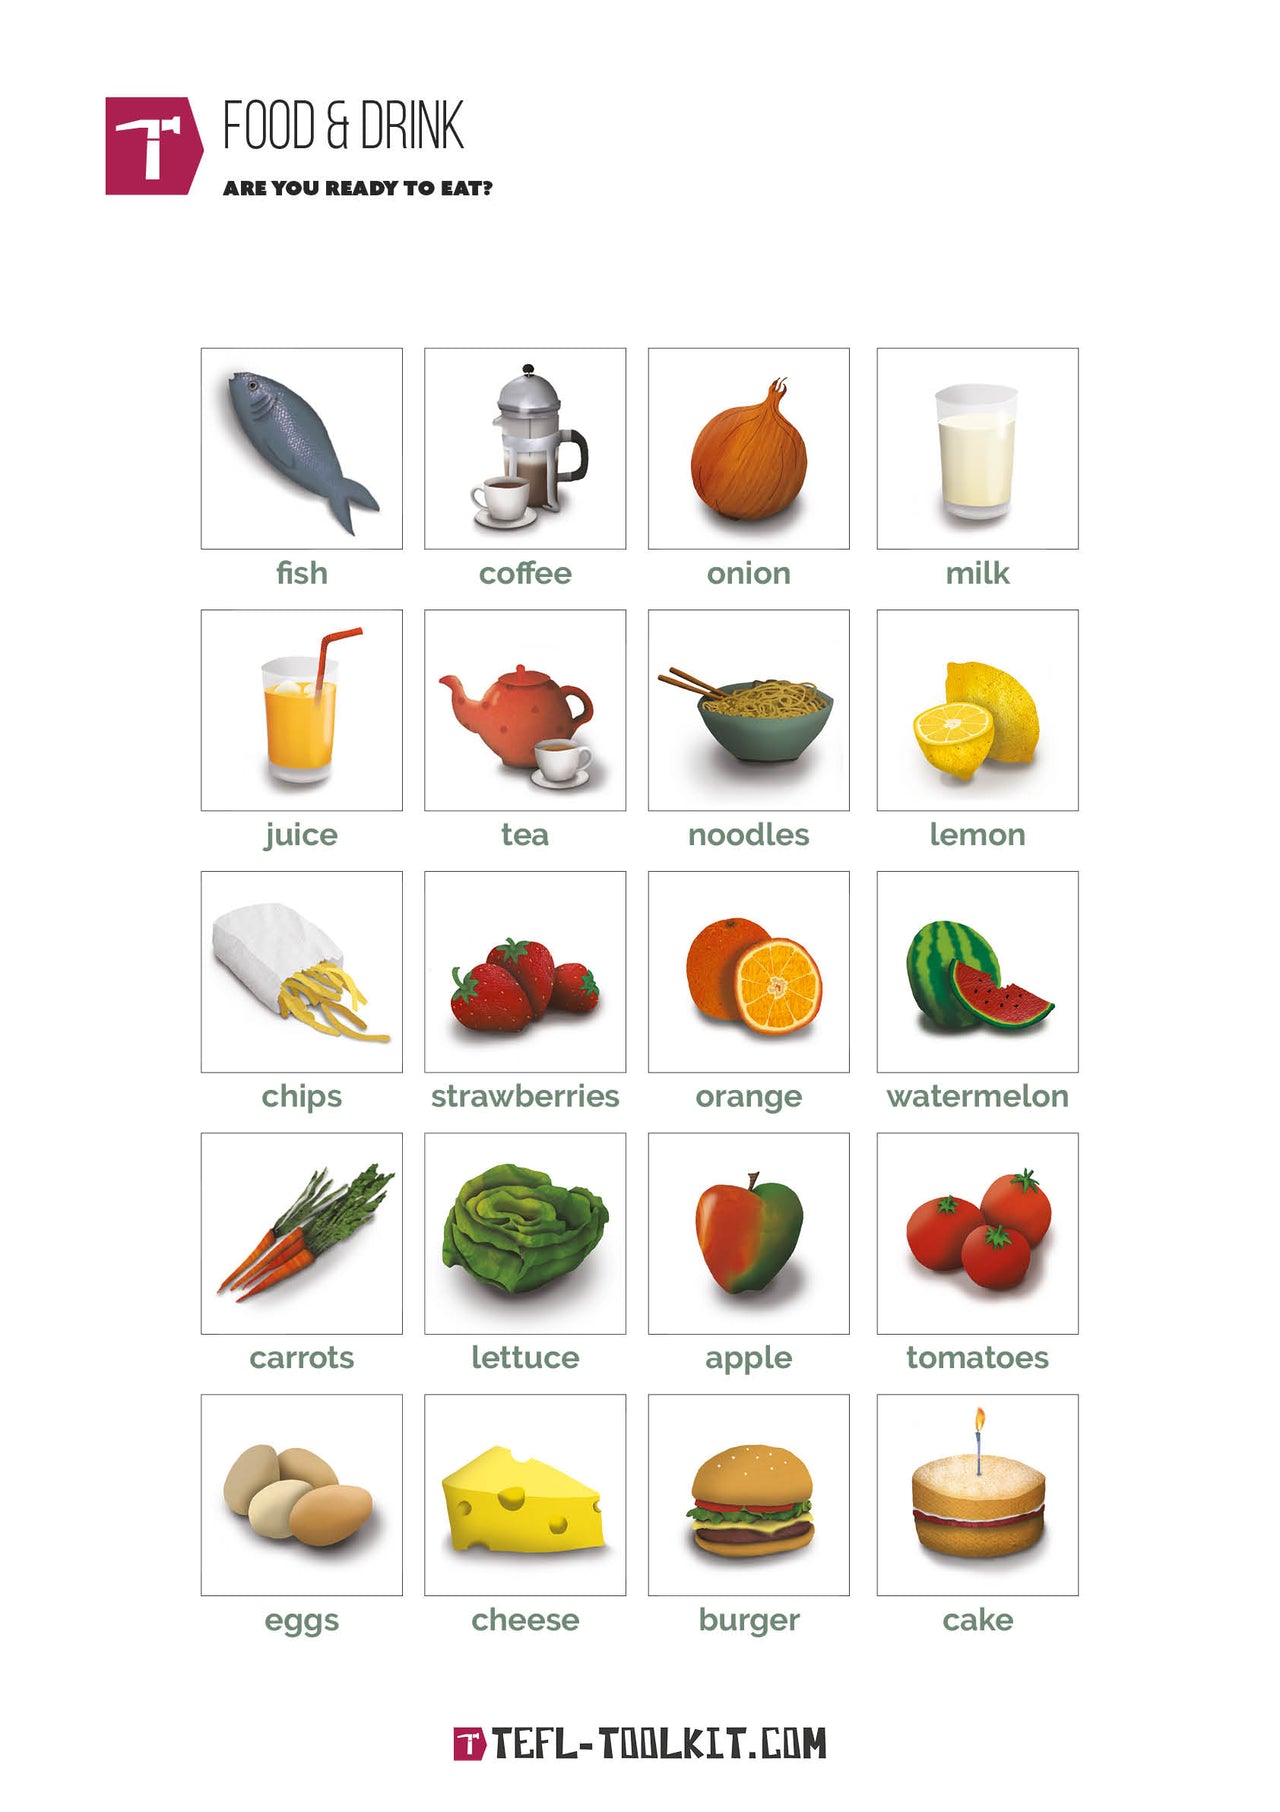 Food and Drink | Virtual Worksheet and Poster - TEFL-Toolkit.com